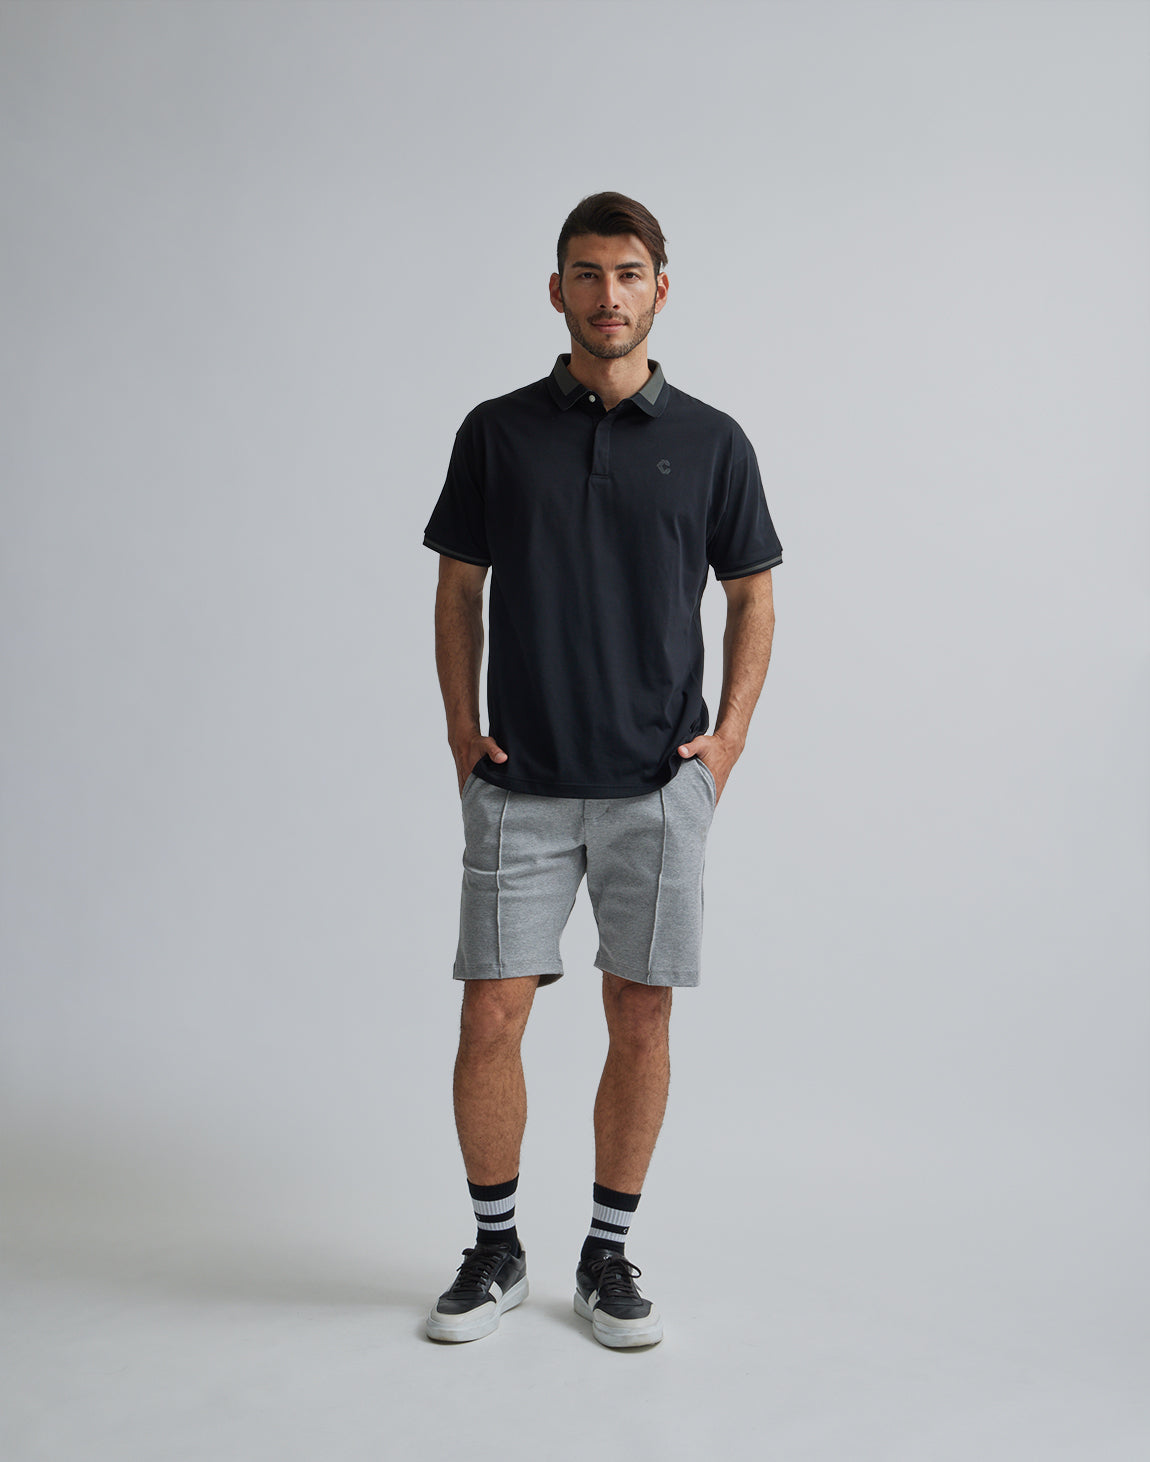 CRONOS BLACK SPORTS POLO – クロノス CRONOS Official Store